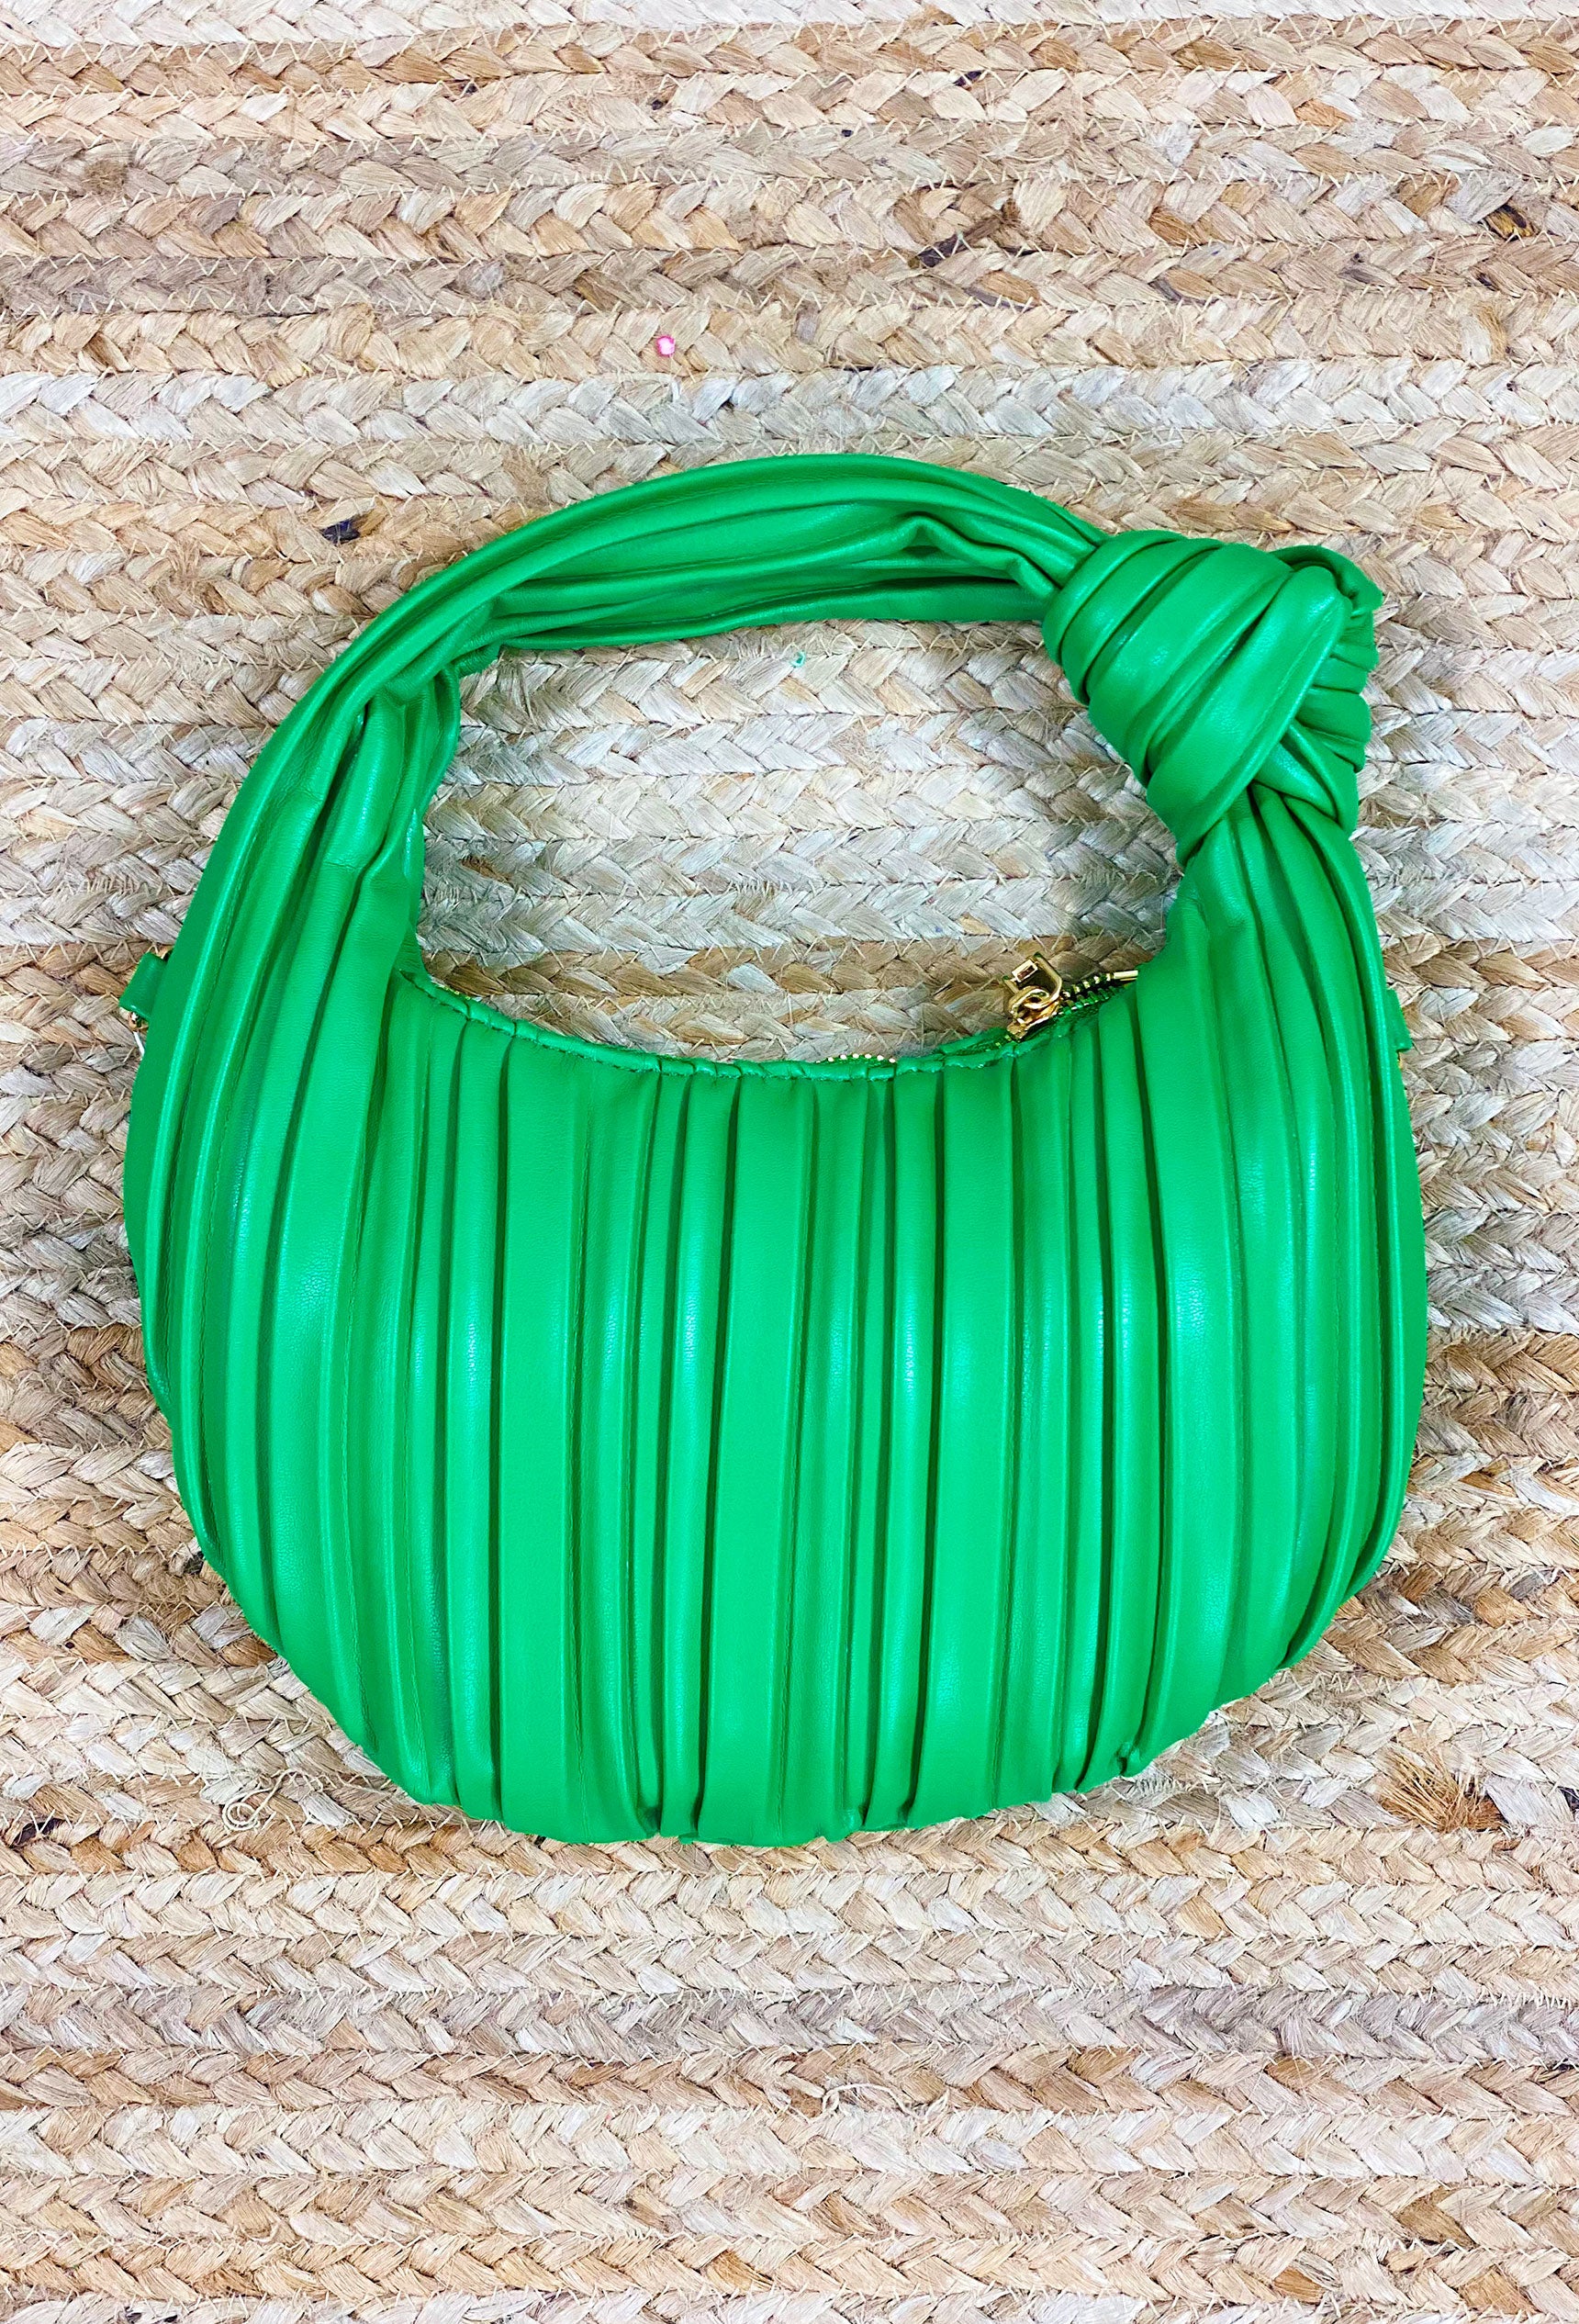 Beyond Words Purse in Green, green tophandle purse with faux knot in handle, zip closure